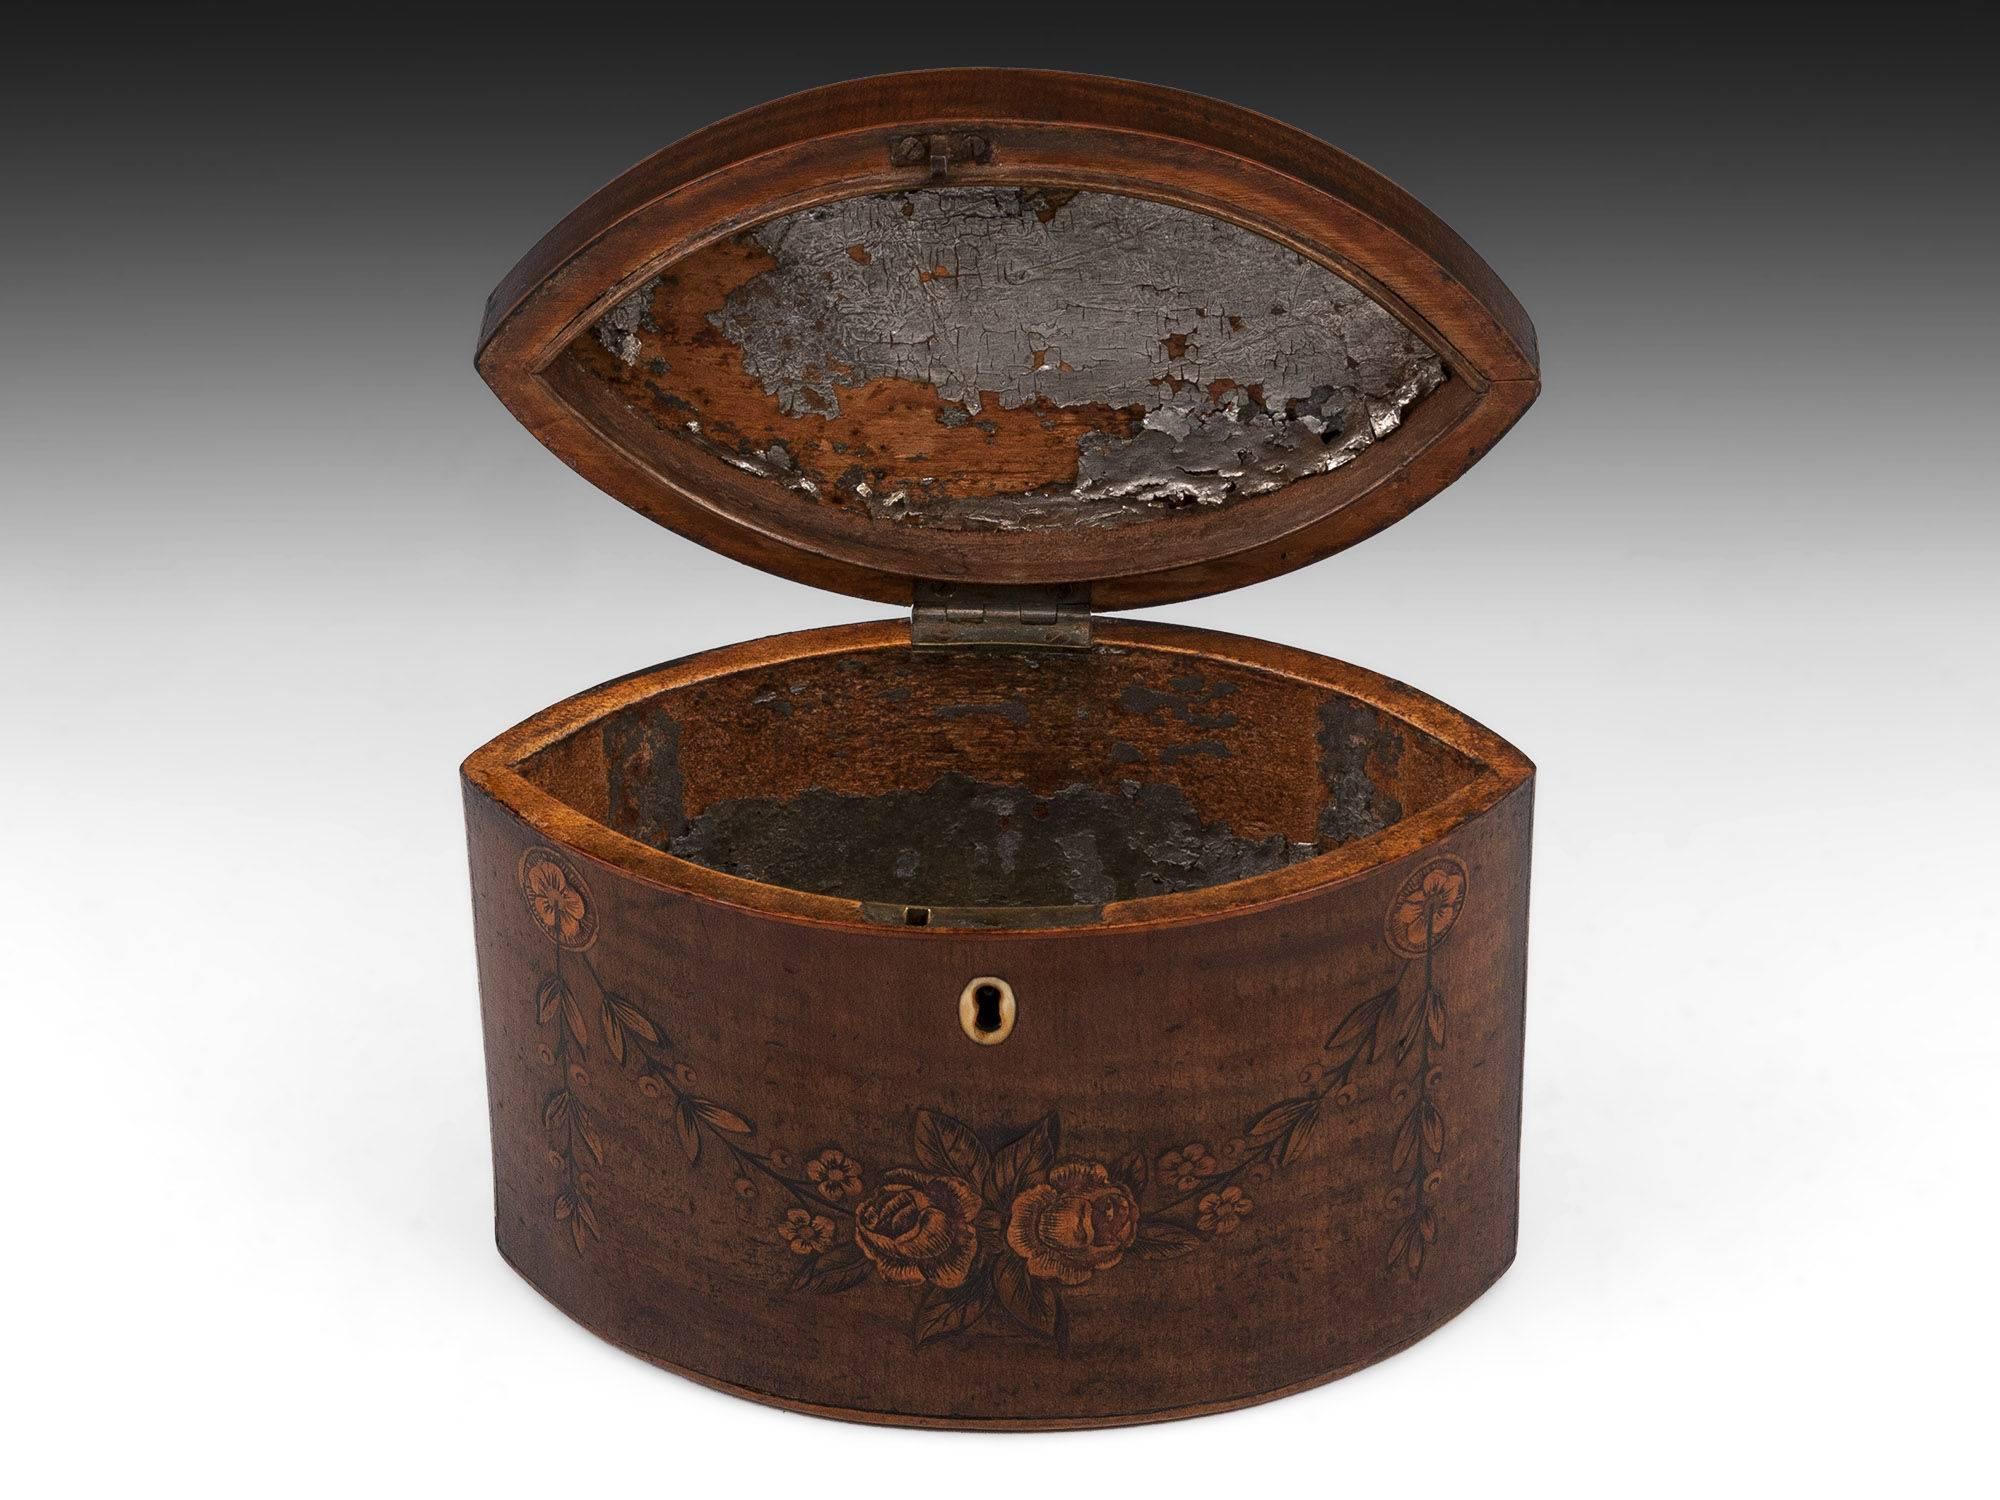 George III 18th Century Period Harewood Inlaid 'Navette' Shaped Tea Caddy For Sale 2